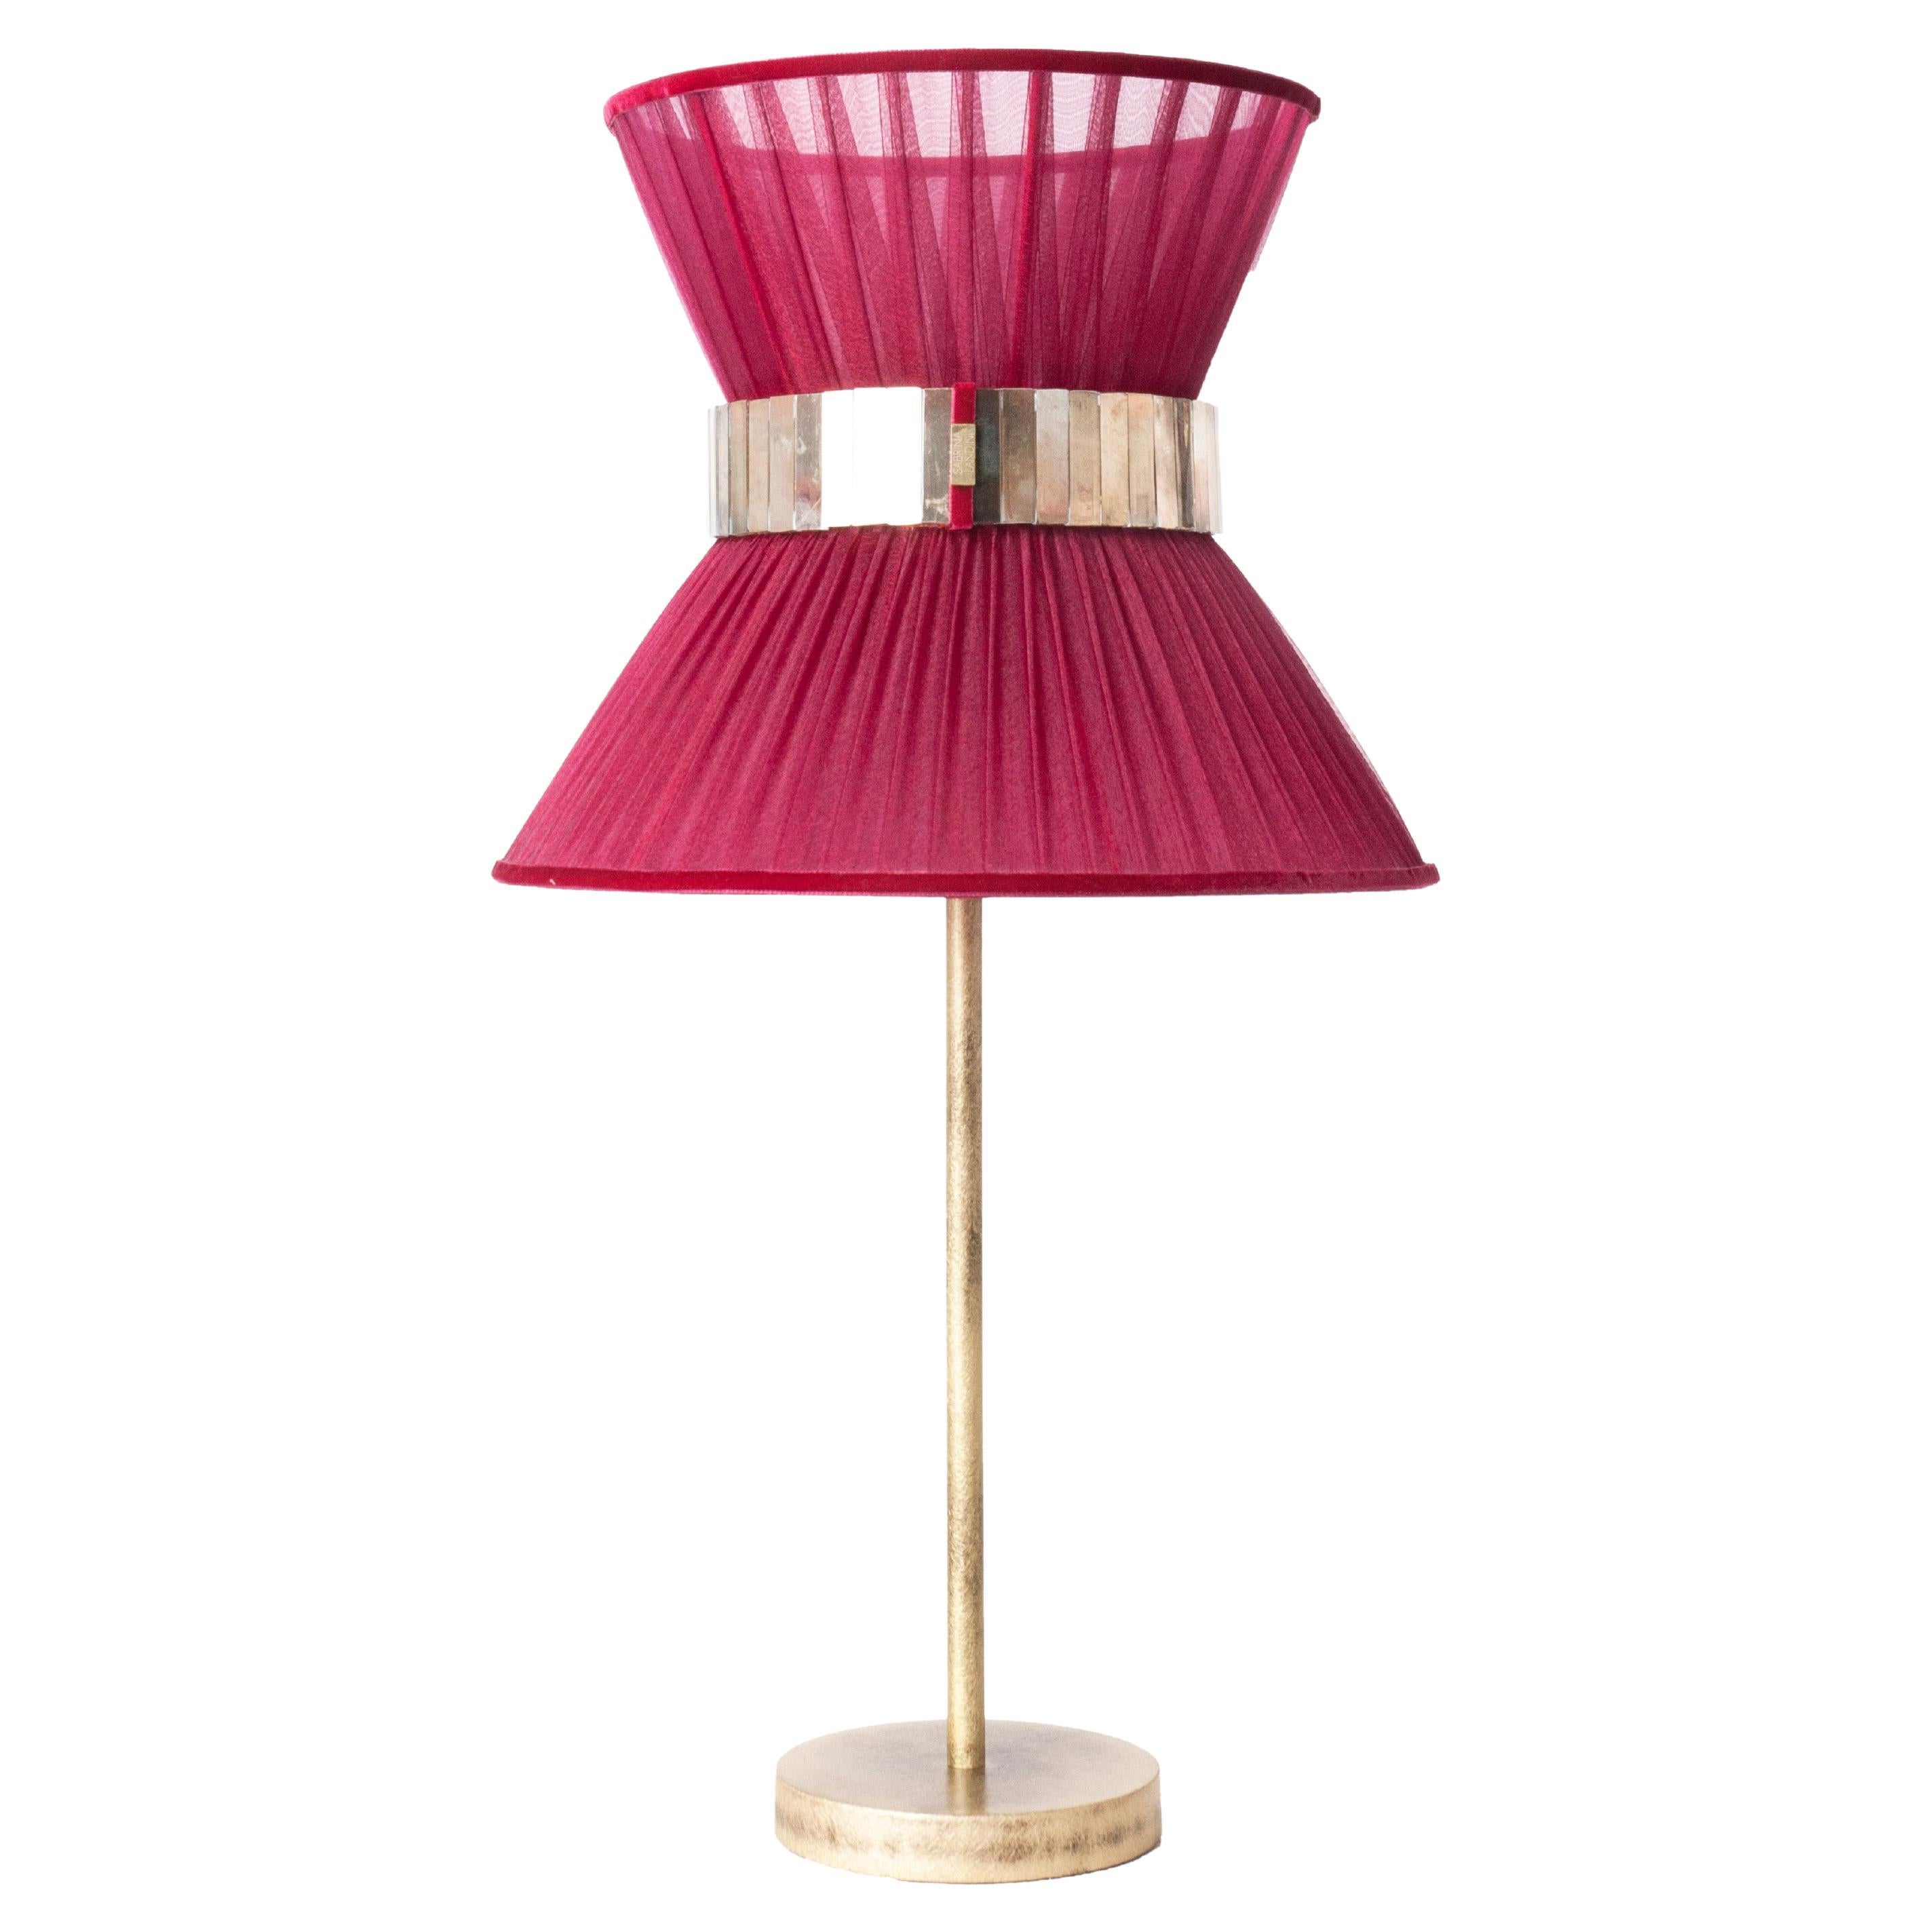  “Tiffany” Table Lamp 30 Ruby Silk, Antiqued Brass, Silvered Glass  